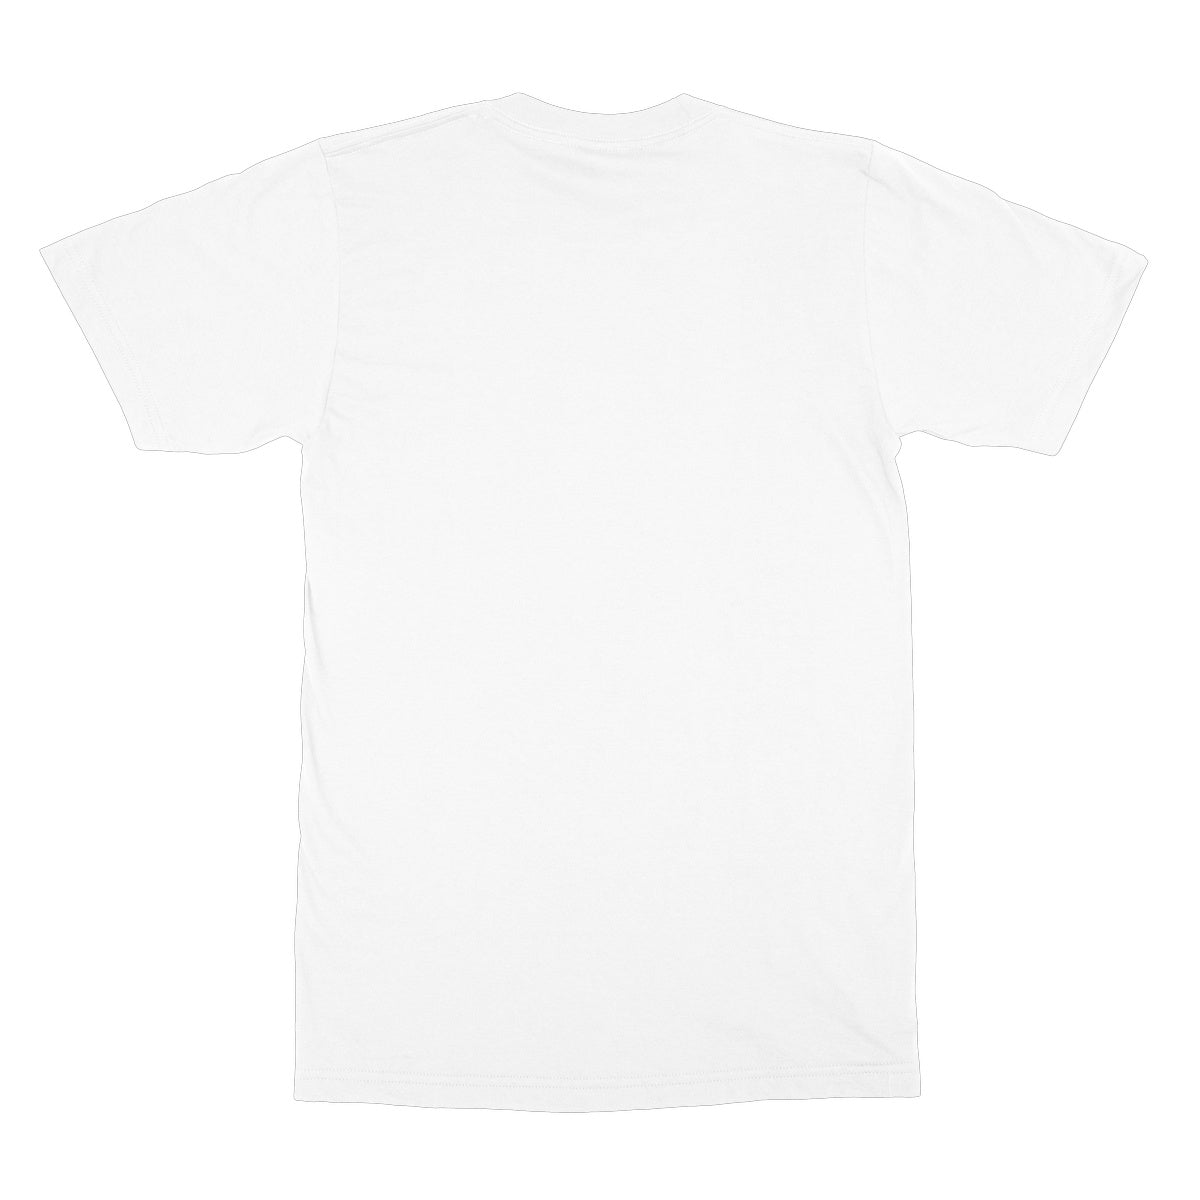 Pan Illustrated Tee Softstyle T-Shirt